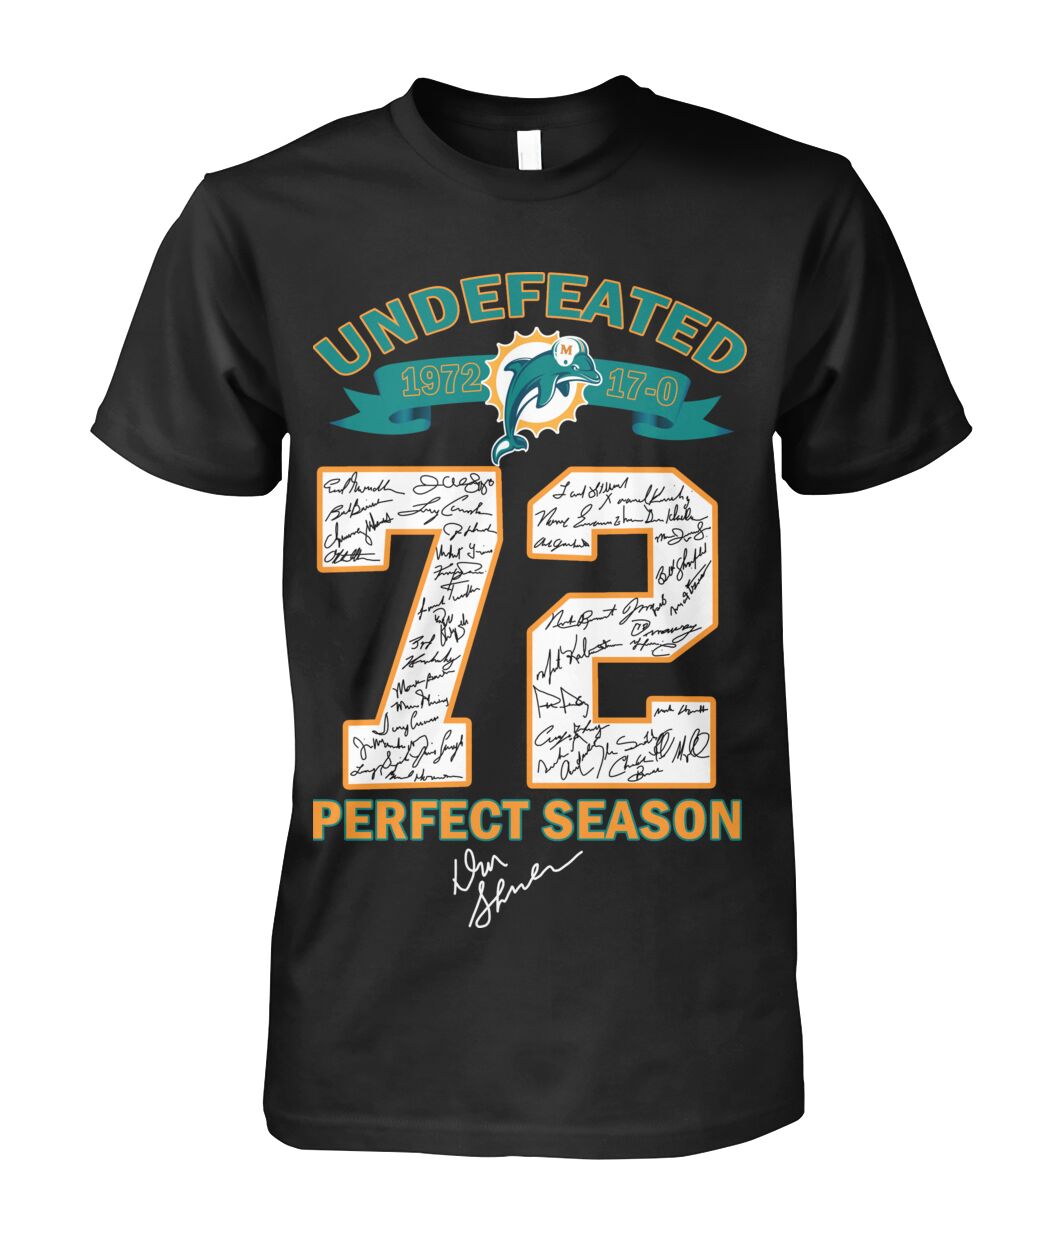 Miami Dolphins Undefeated 72 perfect season shirt as